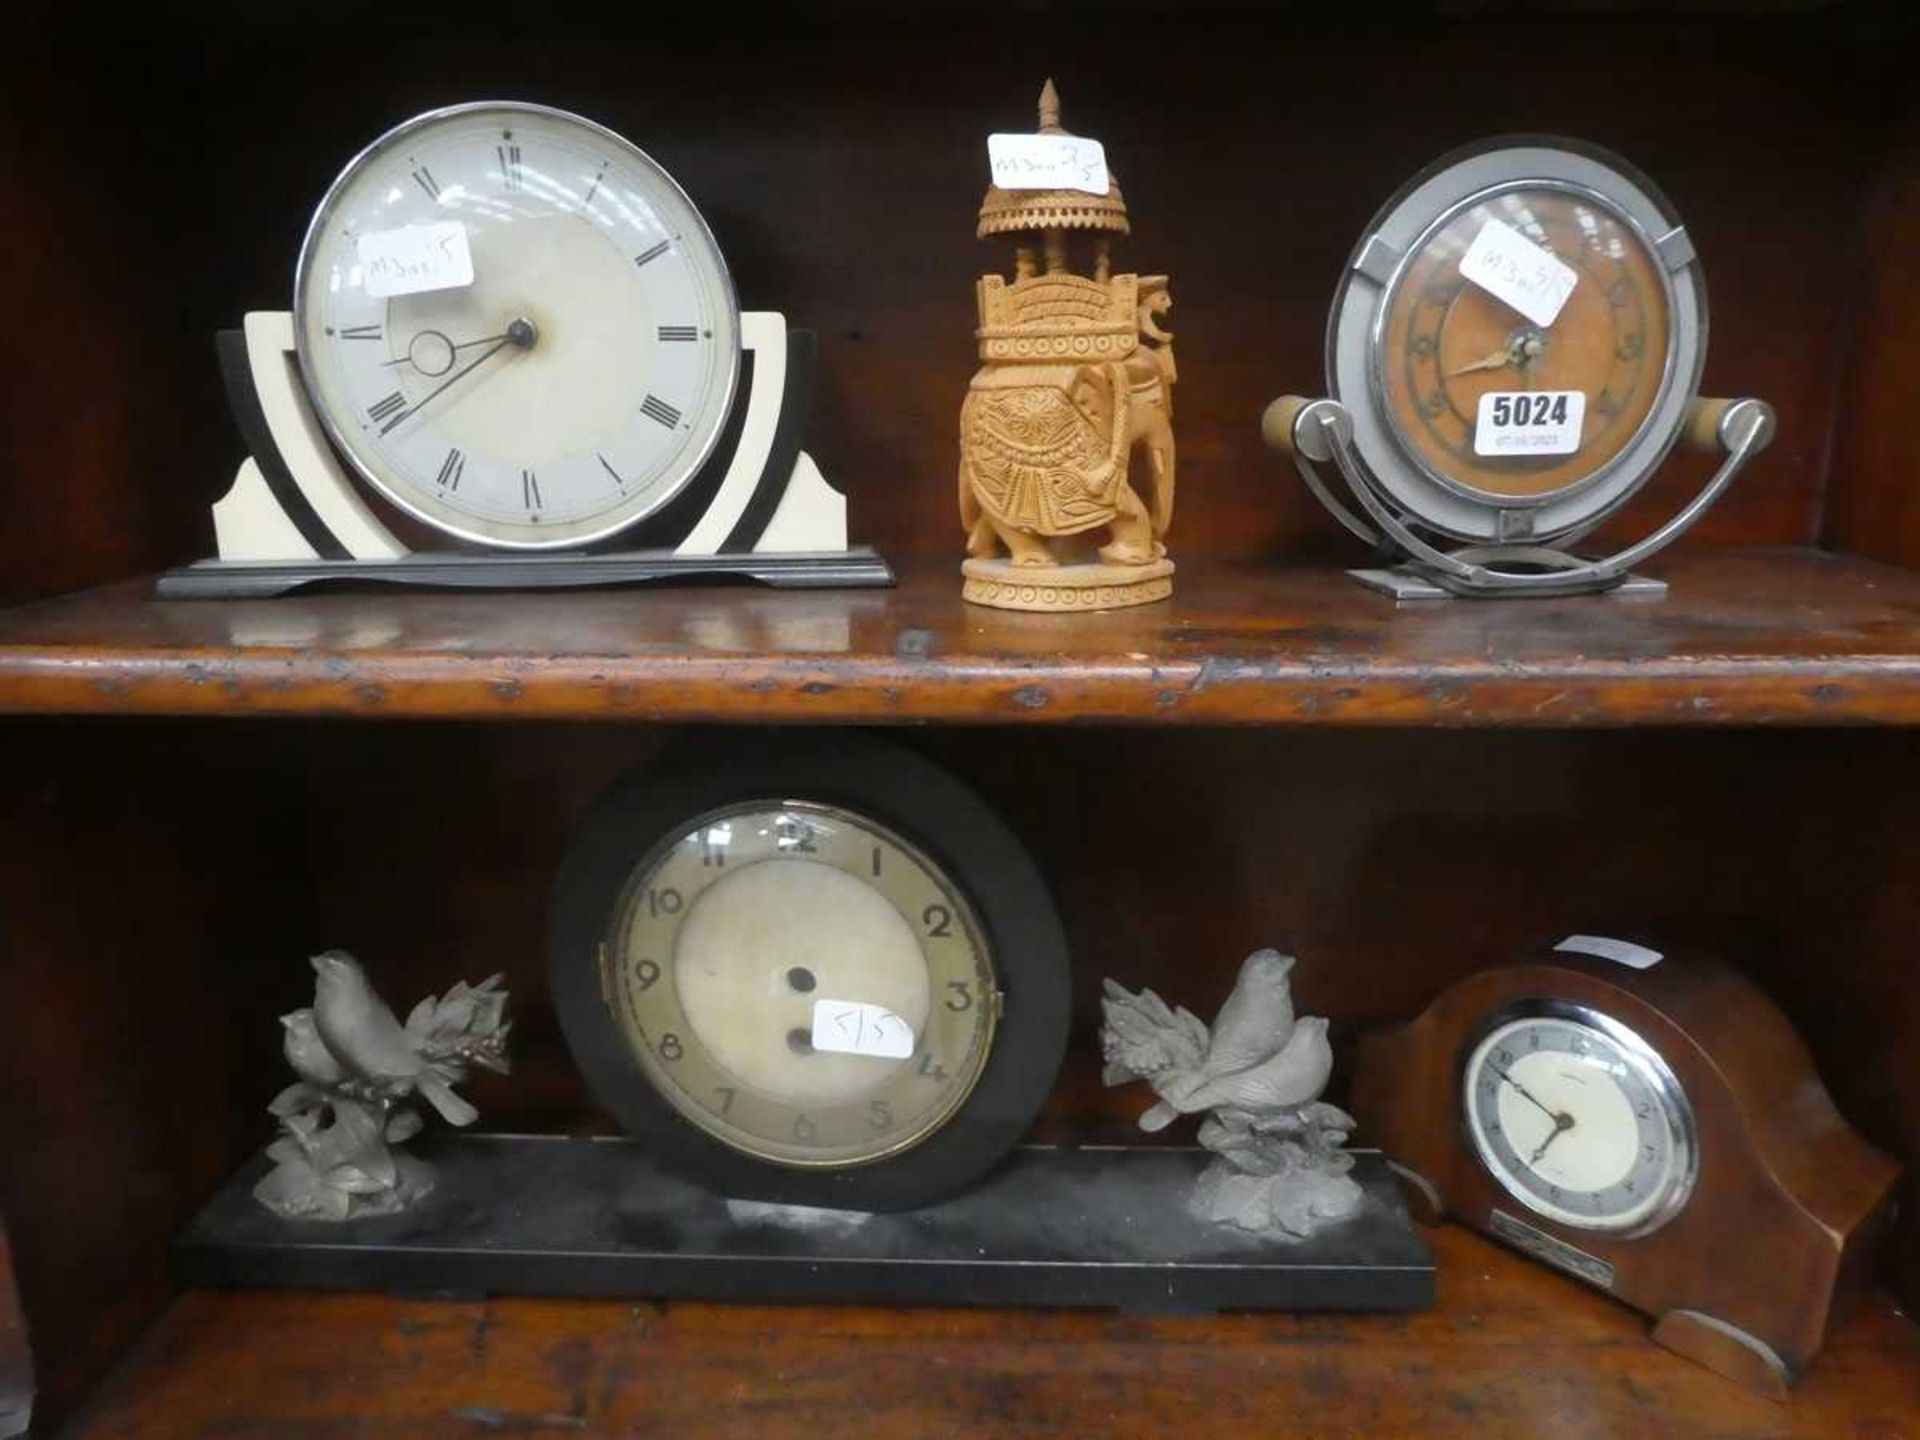 4 x Art Deco and later mantel clocks pus a carved wooden Indian elephant